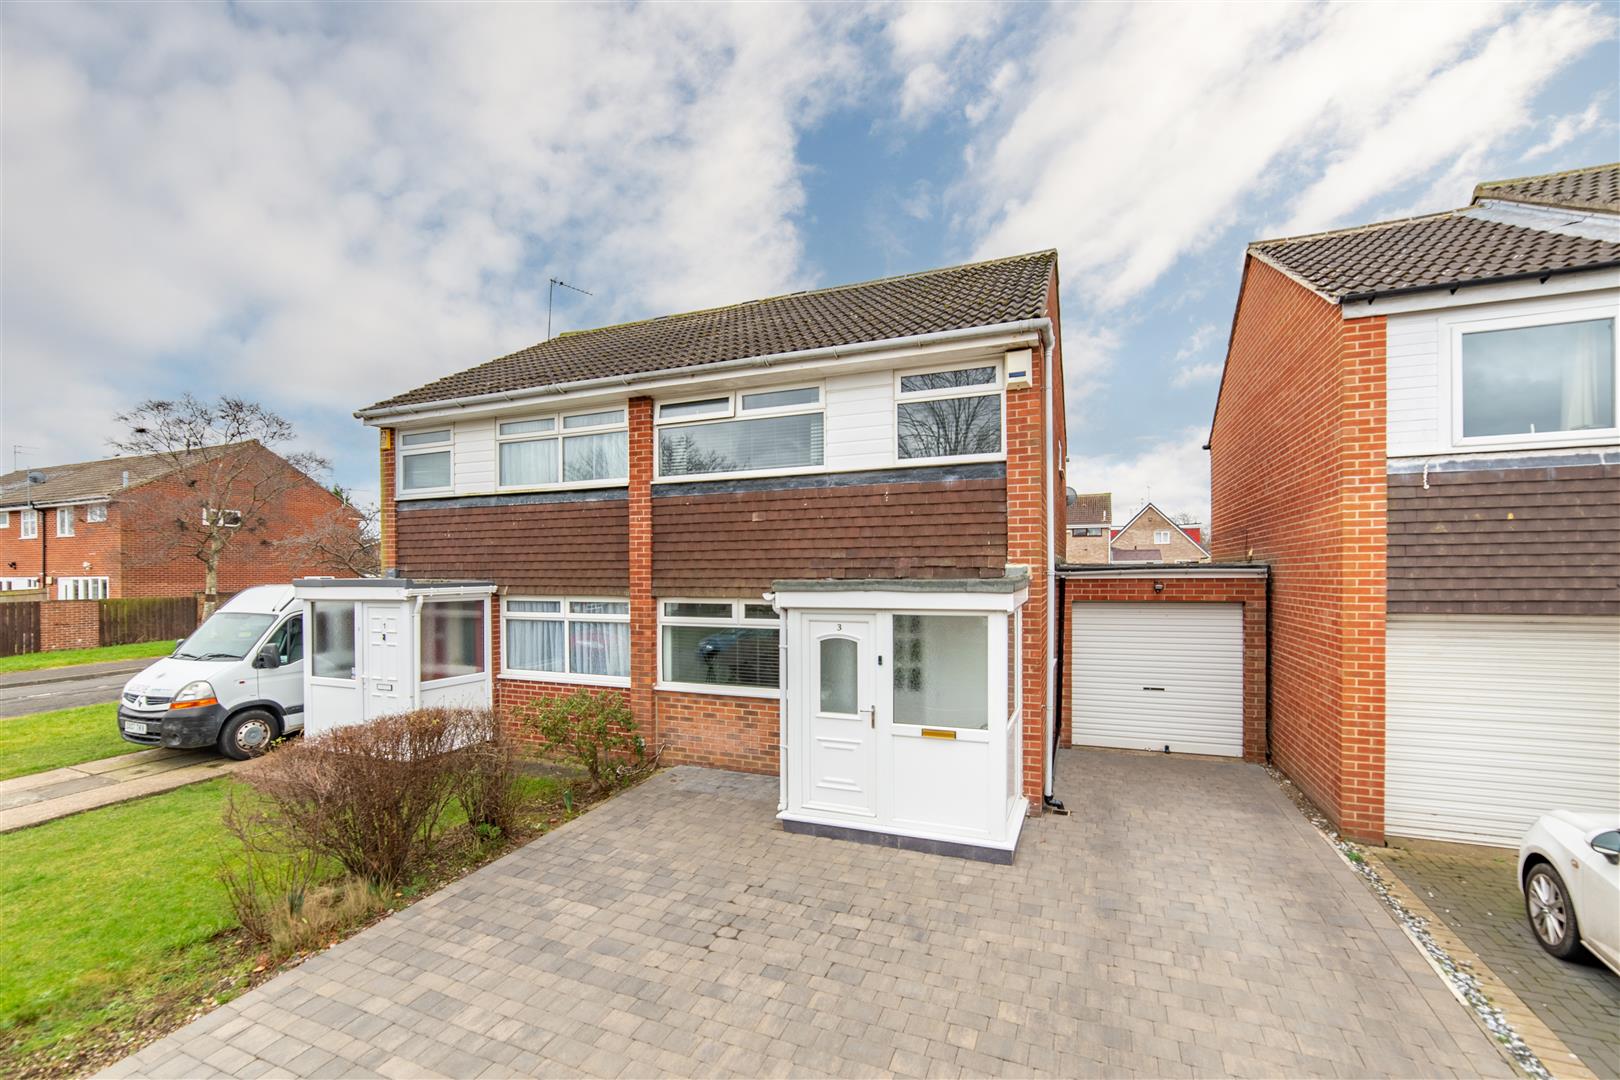 3 bed semi-detached house for sale in Englefield Close, Kingston Park, NE3 